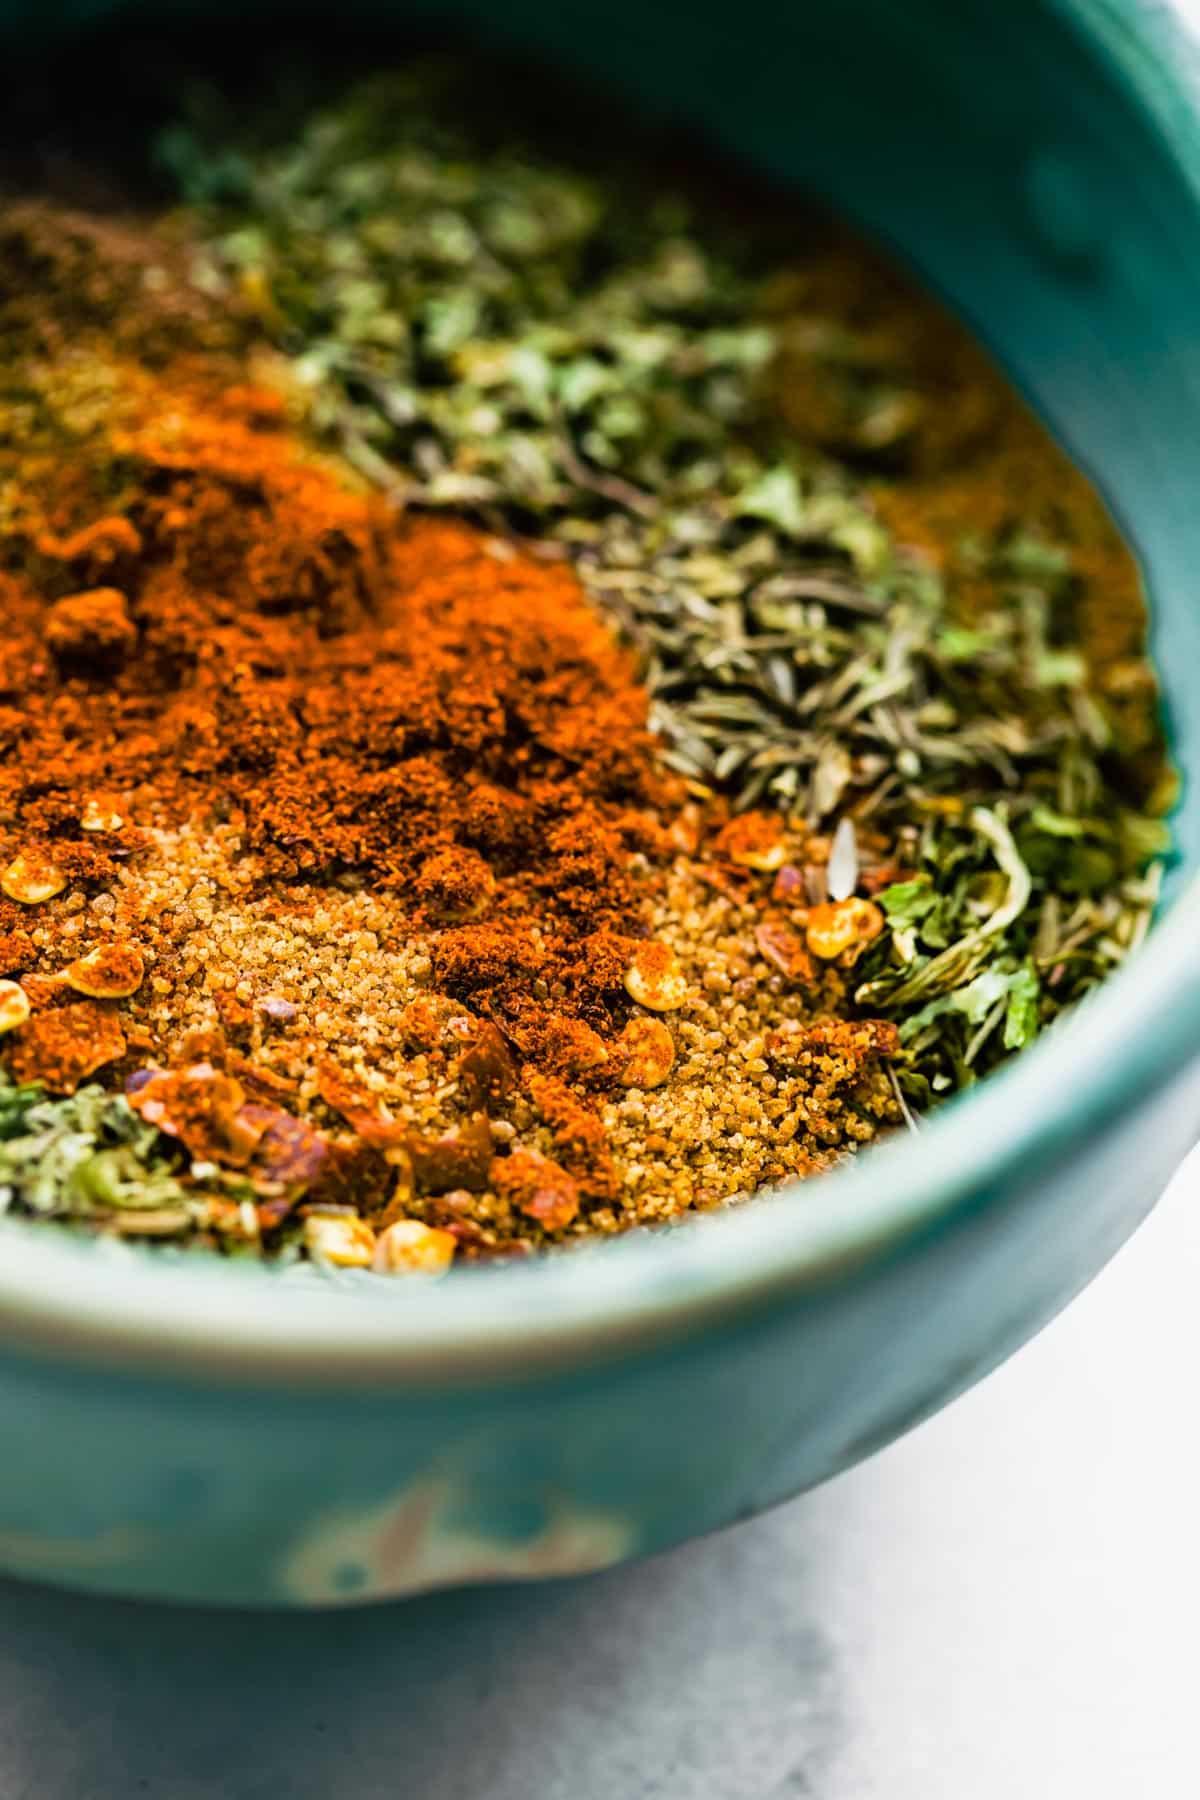 An up close view of spices in a bowl to make jerk seasoning.